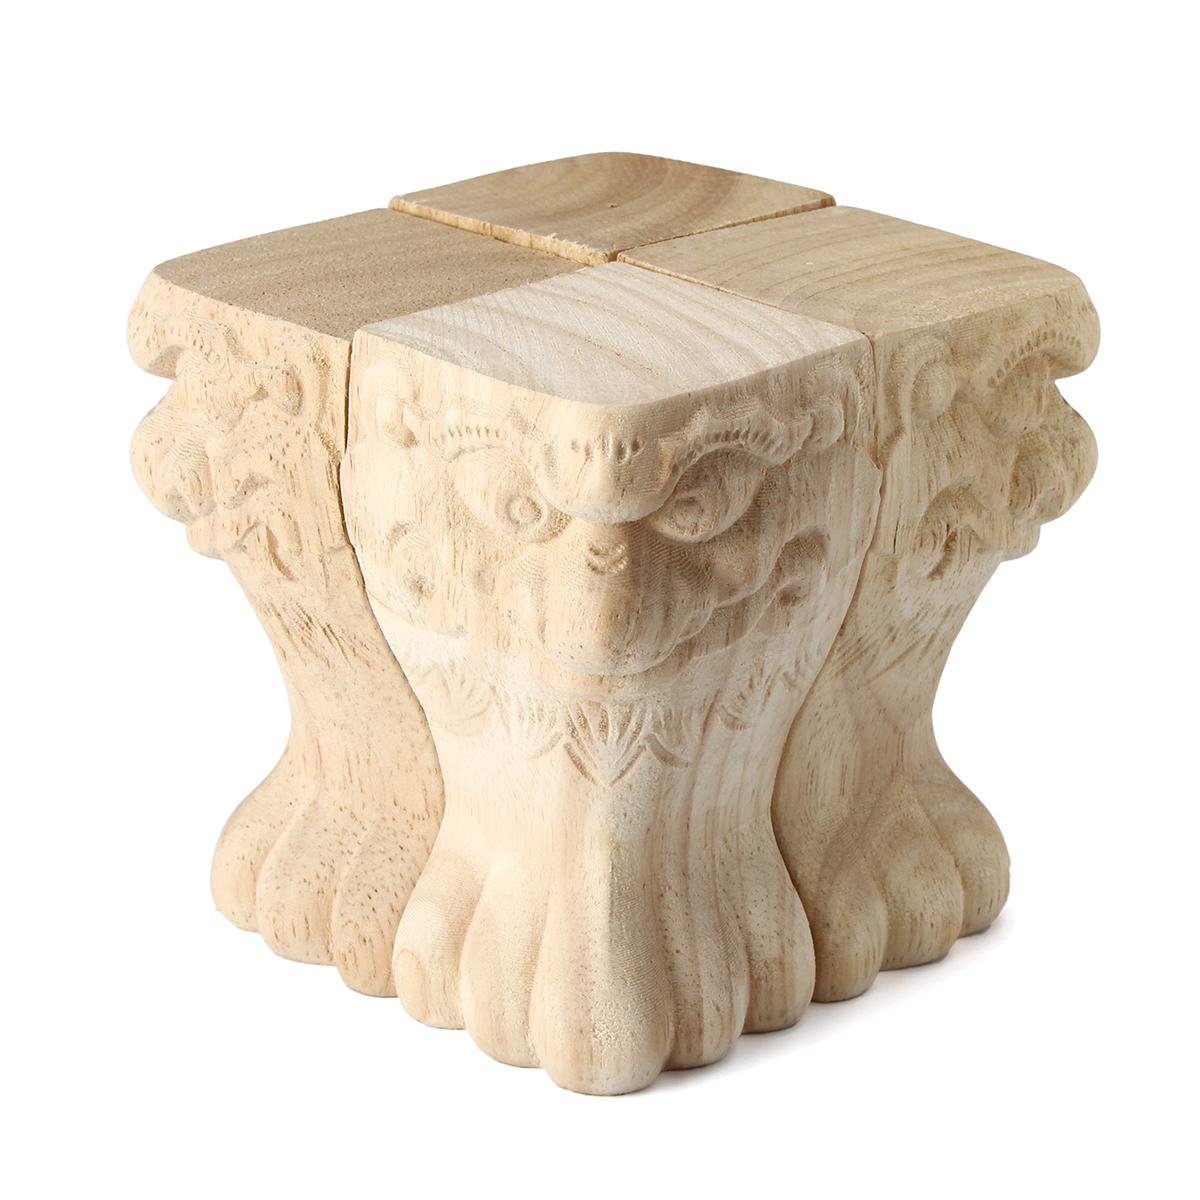 4Pcs-1015cm-European-Solid-Wood-Carving-Furniture-Foot-Legs-Unpainted-Cabinet-Feets-Wood-Decal-1322664-2